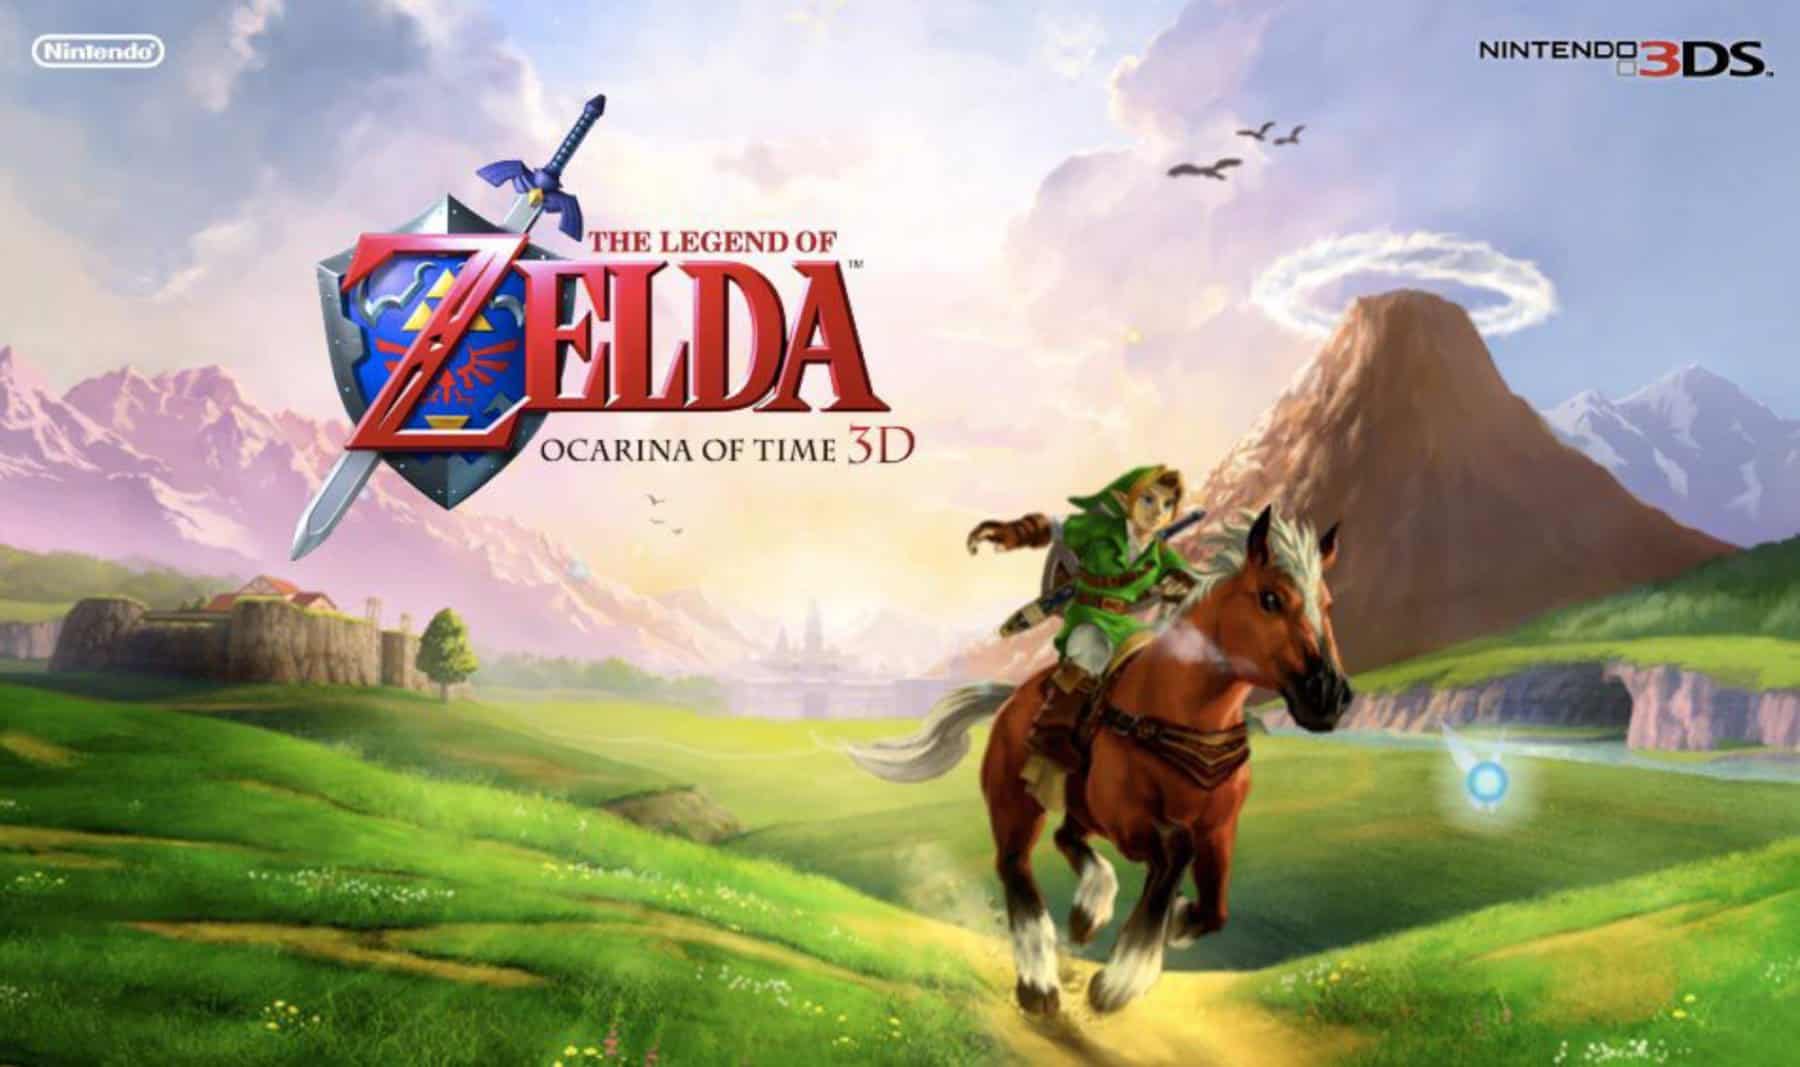 game-review-the-legend-of-zelda-ocarina-of-time-3d-3ds-games-brrraaains-a-head-banging-life